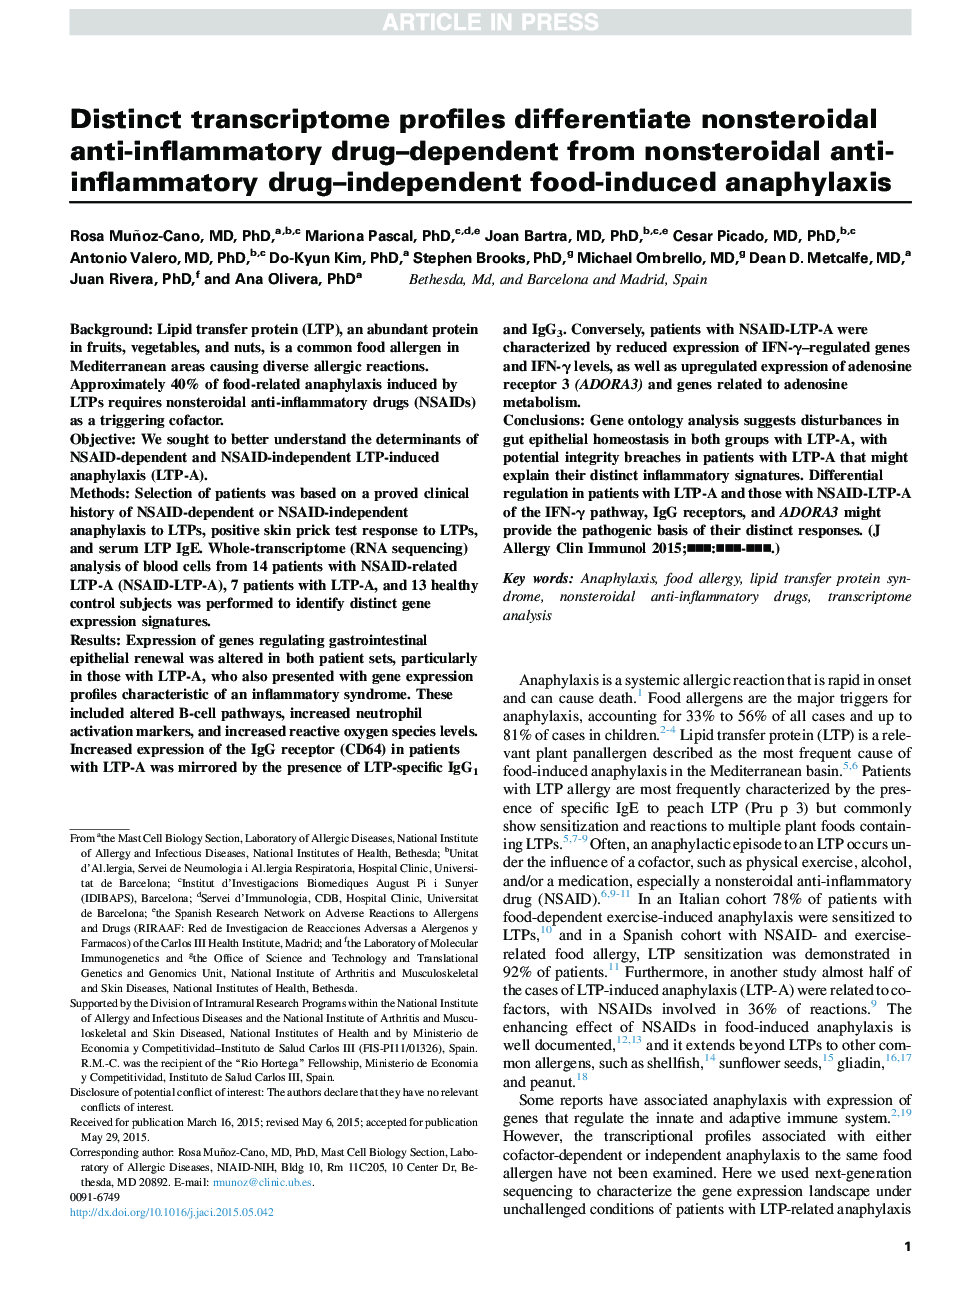 Distinct transcriptome profiles differentiate nonsteroidal anti-inflammatory drug-dependent from nonsteroidal anti-inflammatory drug-independent food-induced anaphylaxis